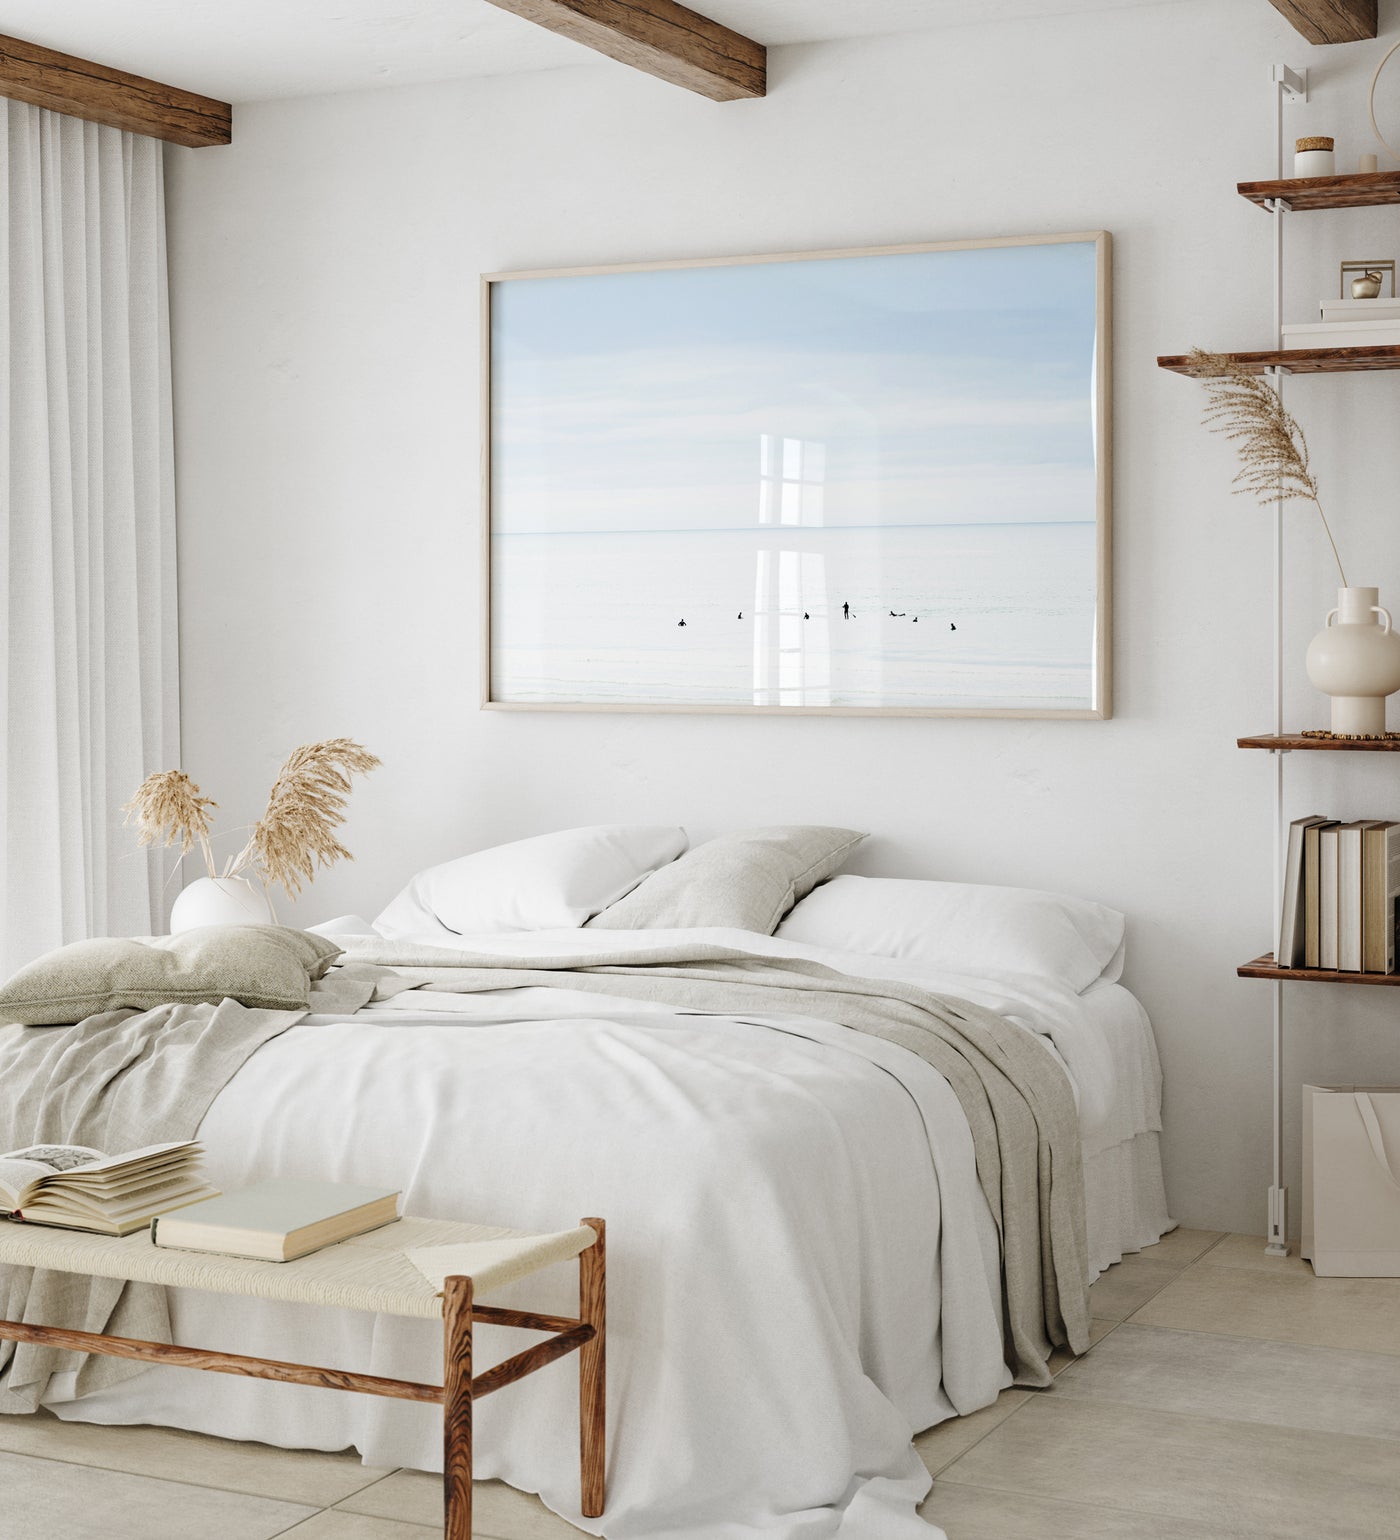 Large fine art surfing print by Cattie Coyle Photography in bedroom